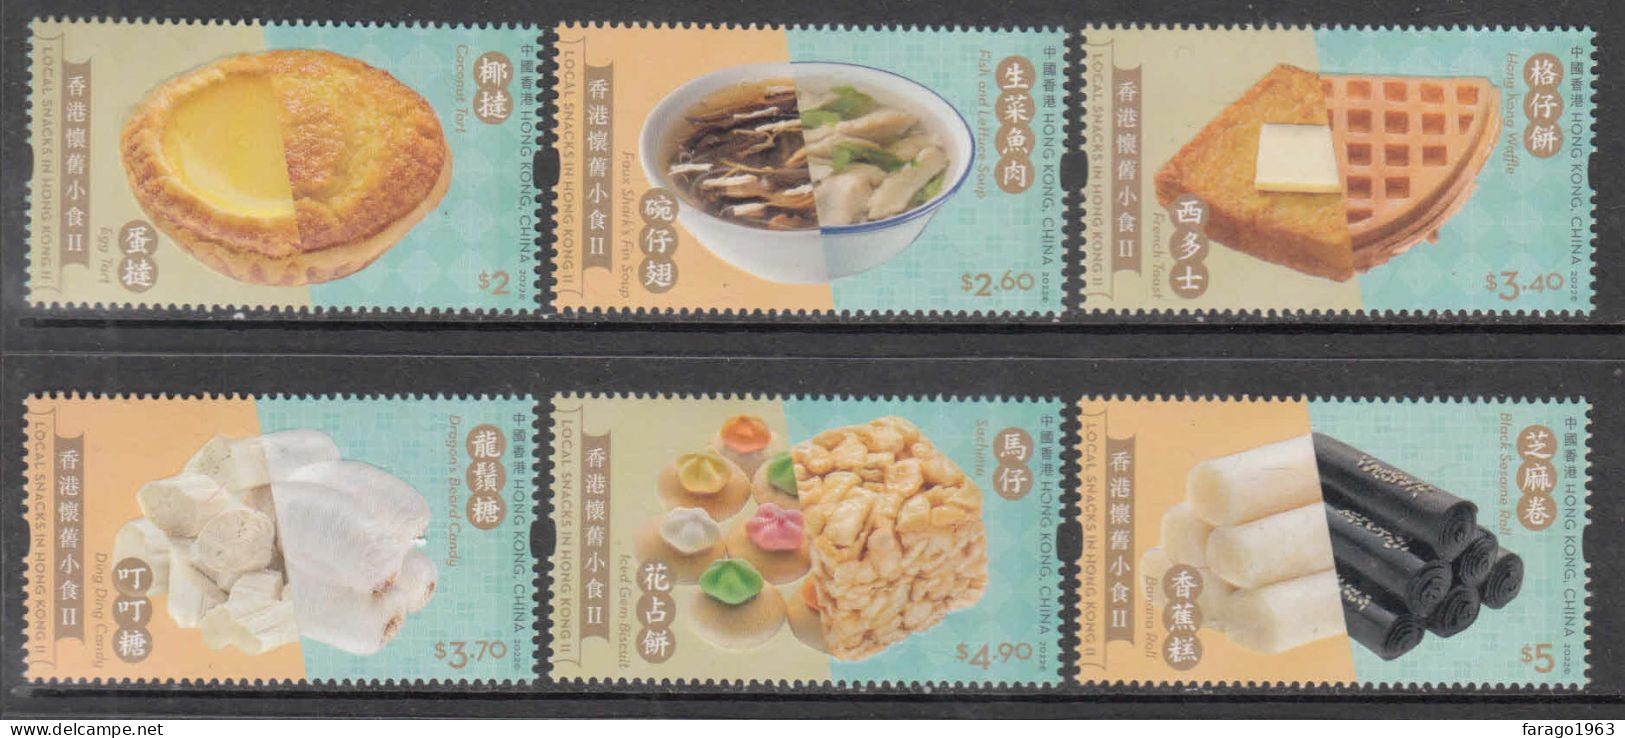 2022 Hong Kong Local Snacks Gastronomie  Complete Set Of 6 MNH @  FACE VALUE - Unused Stamps